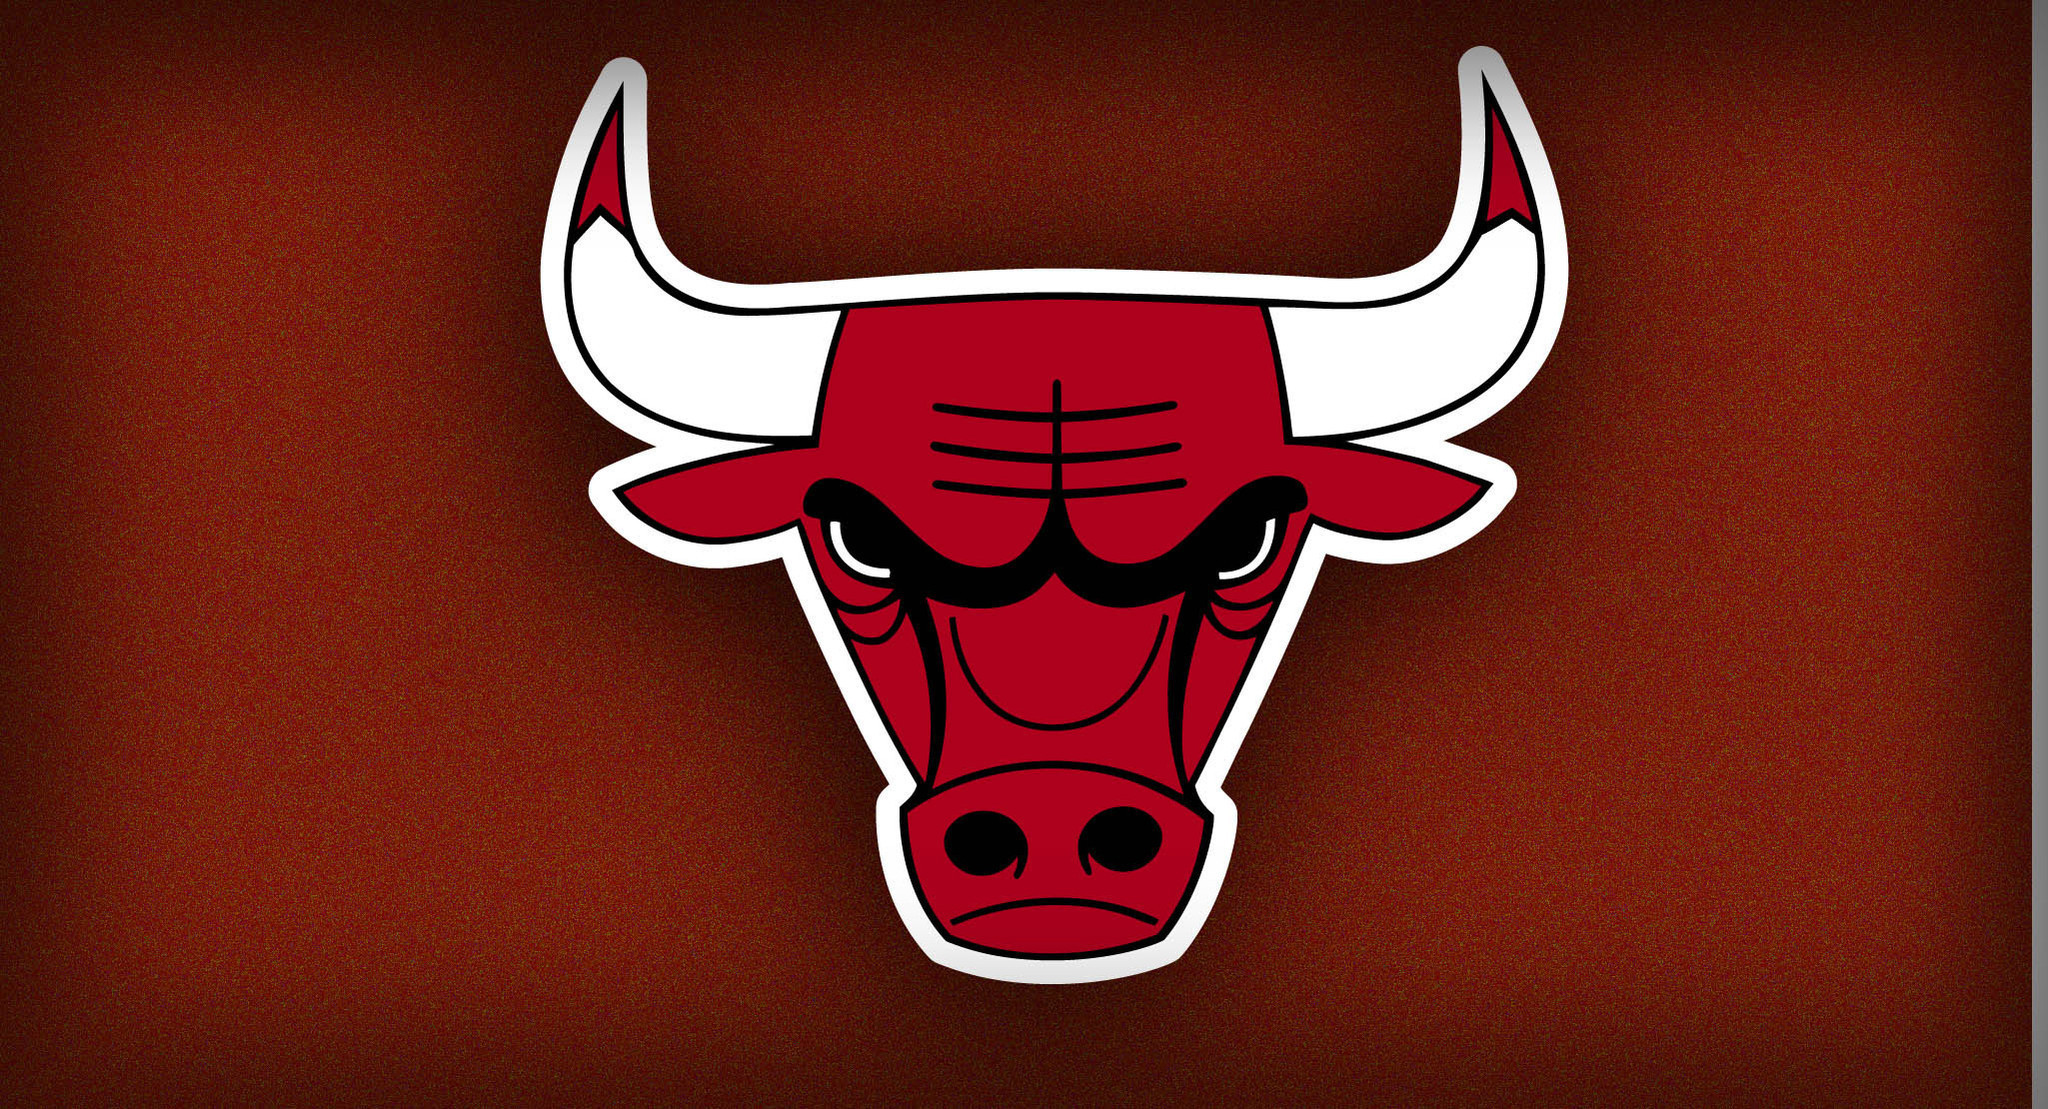 Chicago Bulls Articles, Photos, and Videos - Daily Press